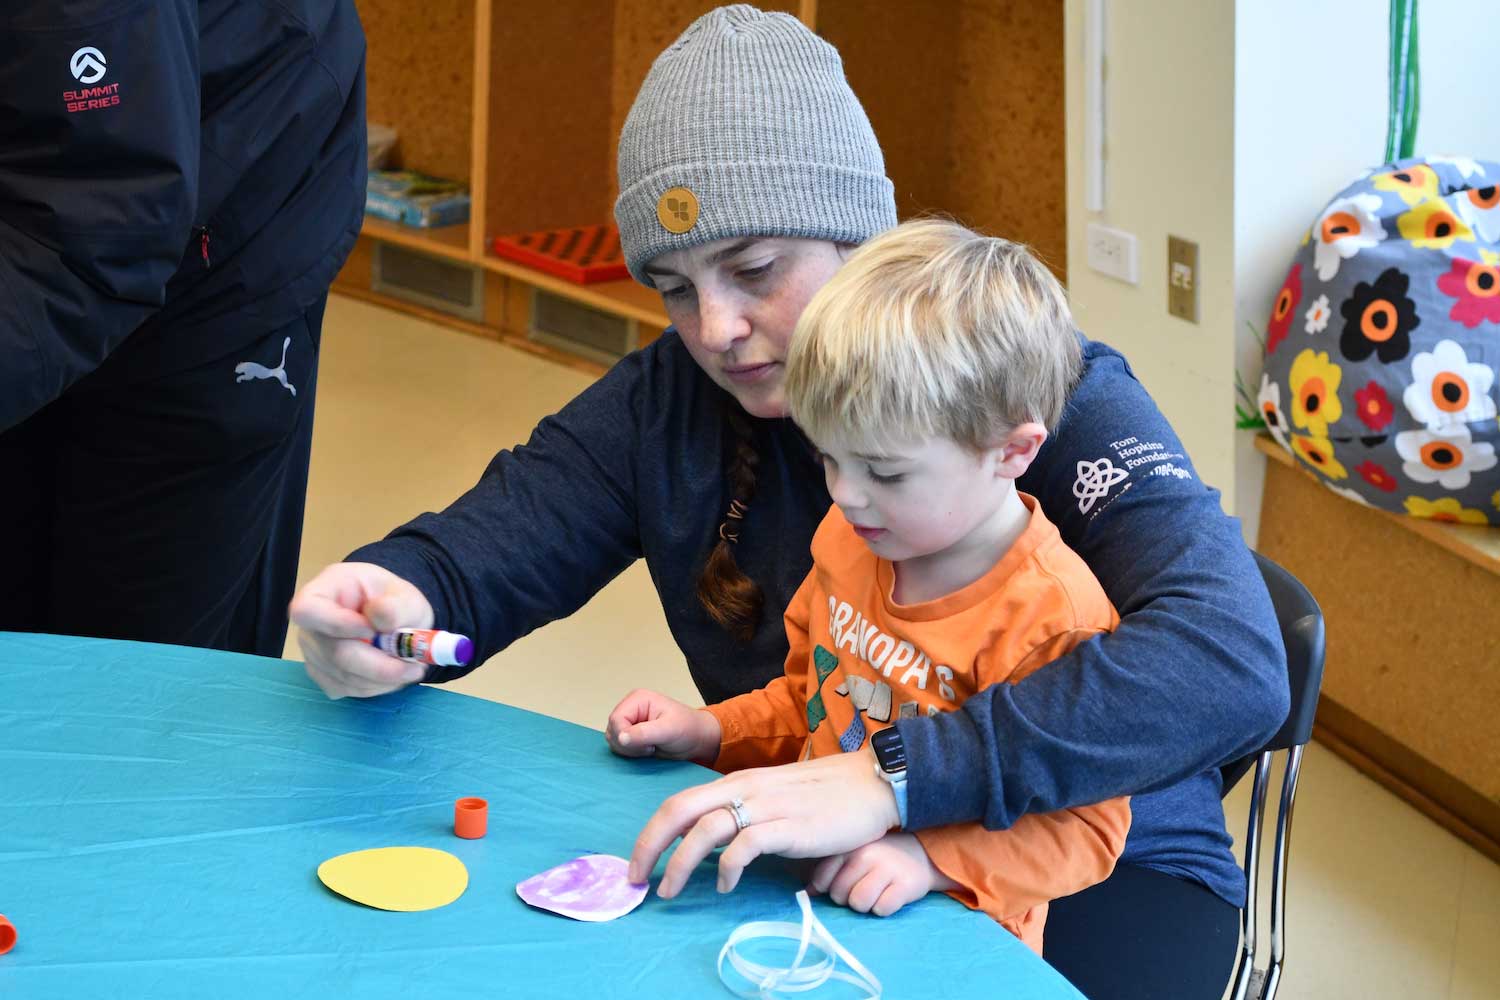 An adult helping a child with a craft project while sitting at a table.